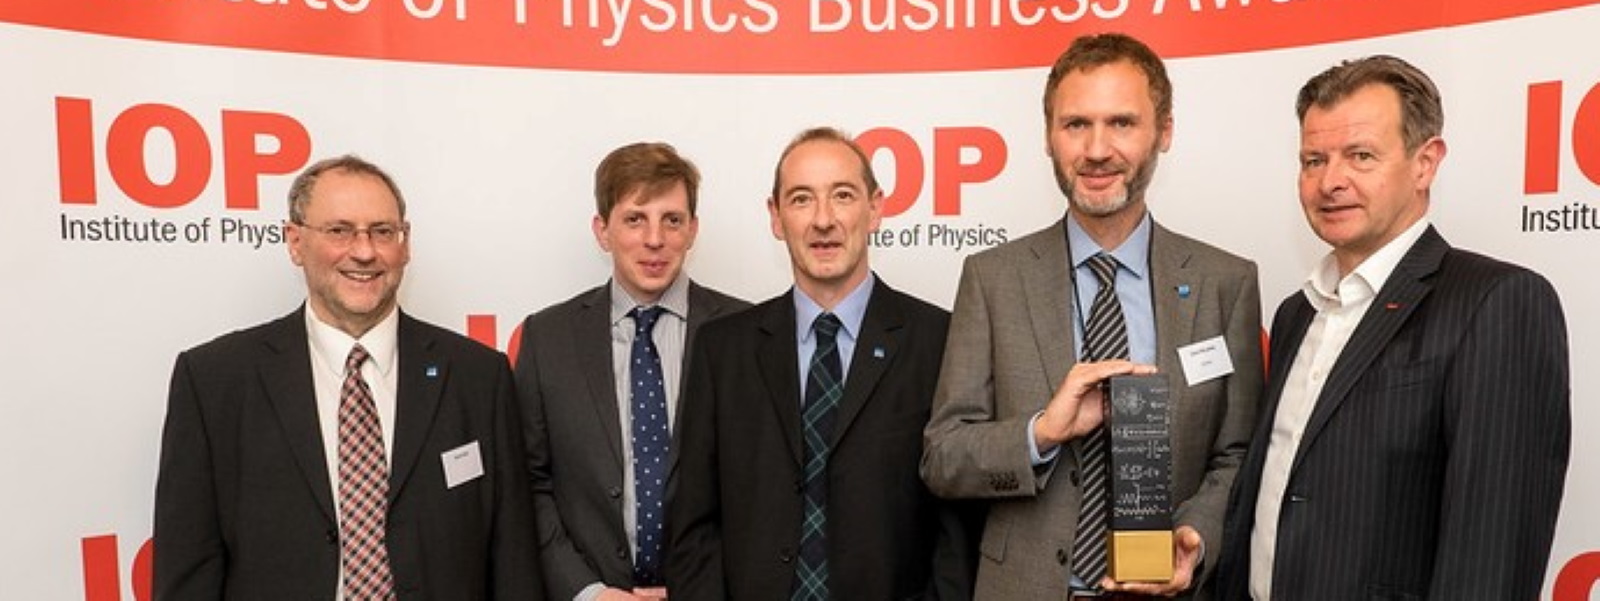 Left to right: Professor David Birch (HORIBA and University of Strathclyde); Richard Hirsch (HORIBA); Dr Graham Hungerford (HORIBA), Dr David McLoskey (HORIBA) and Dr James McKenzie (Vice-President Business, Institute of Physics). Photo by Institute of Physics.